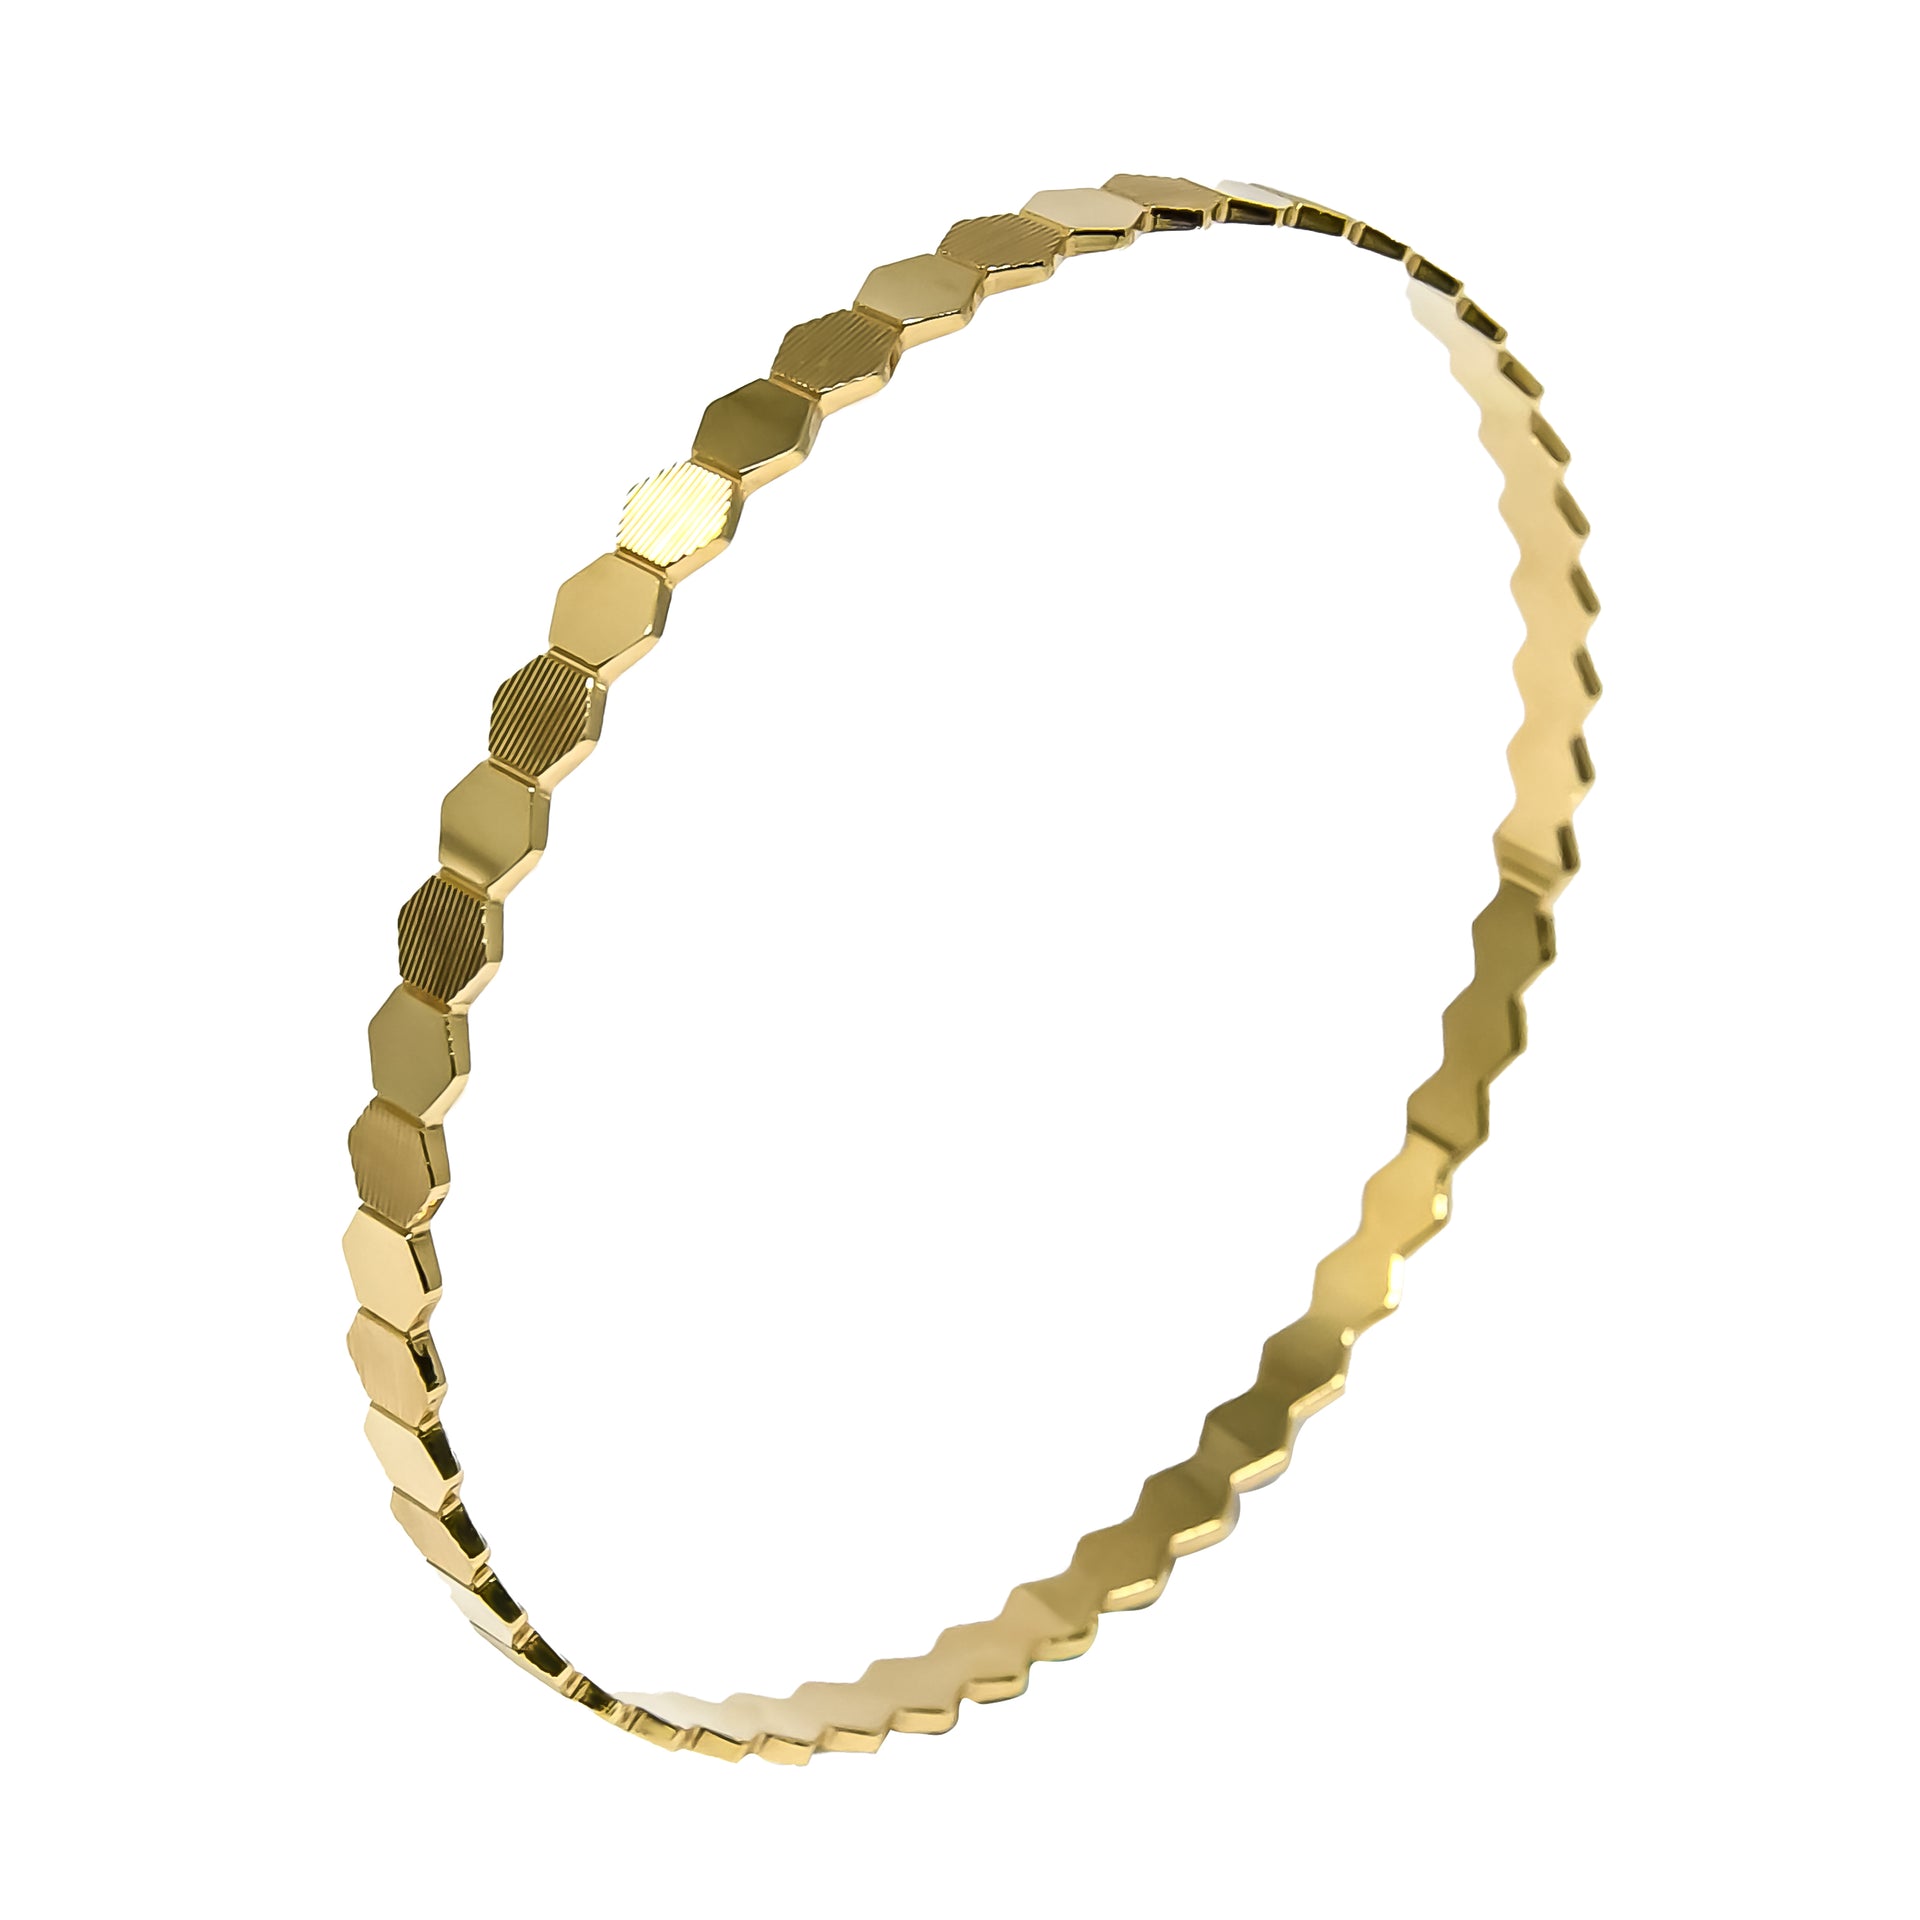 Bangle EARTH IS ROUND 5mm hexagon pattern yellow gold 18k 750